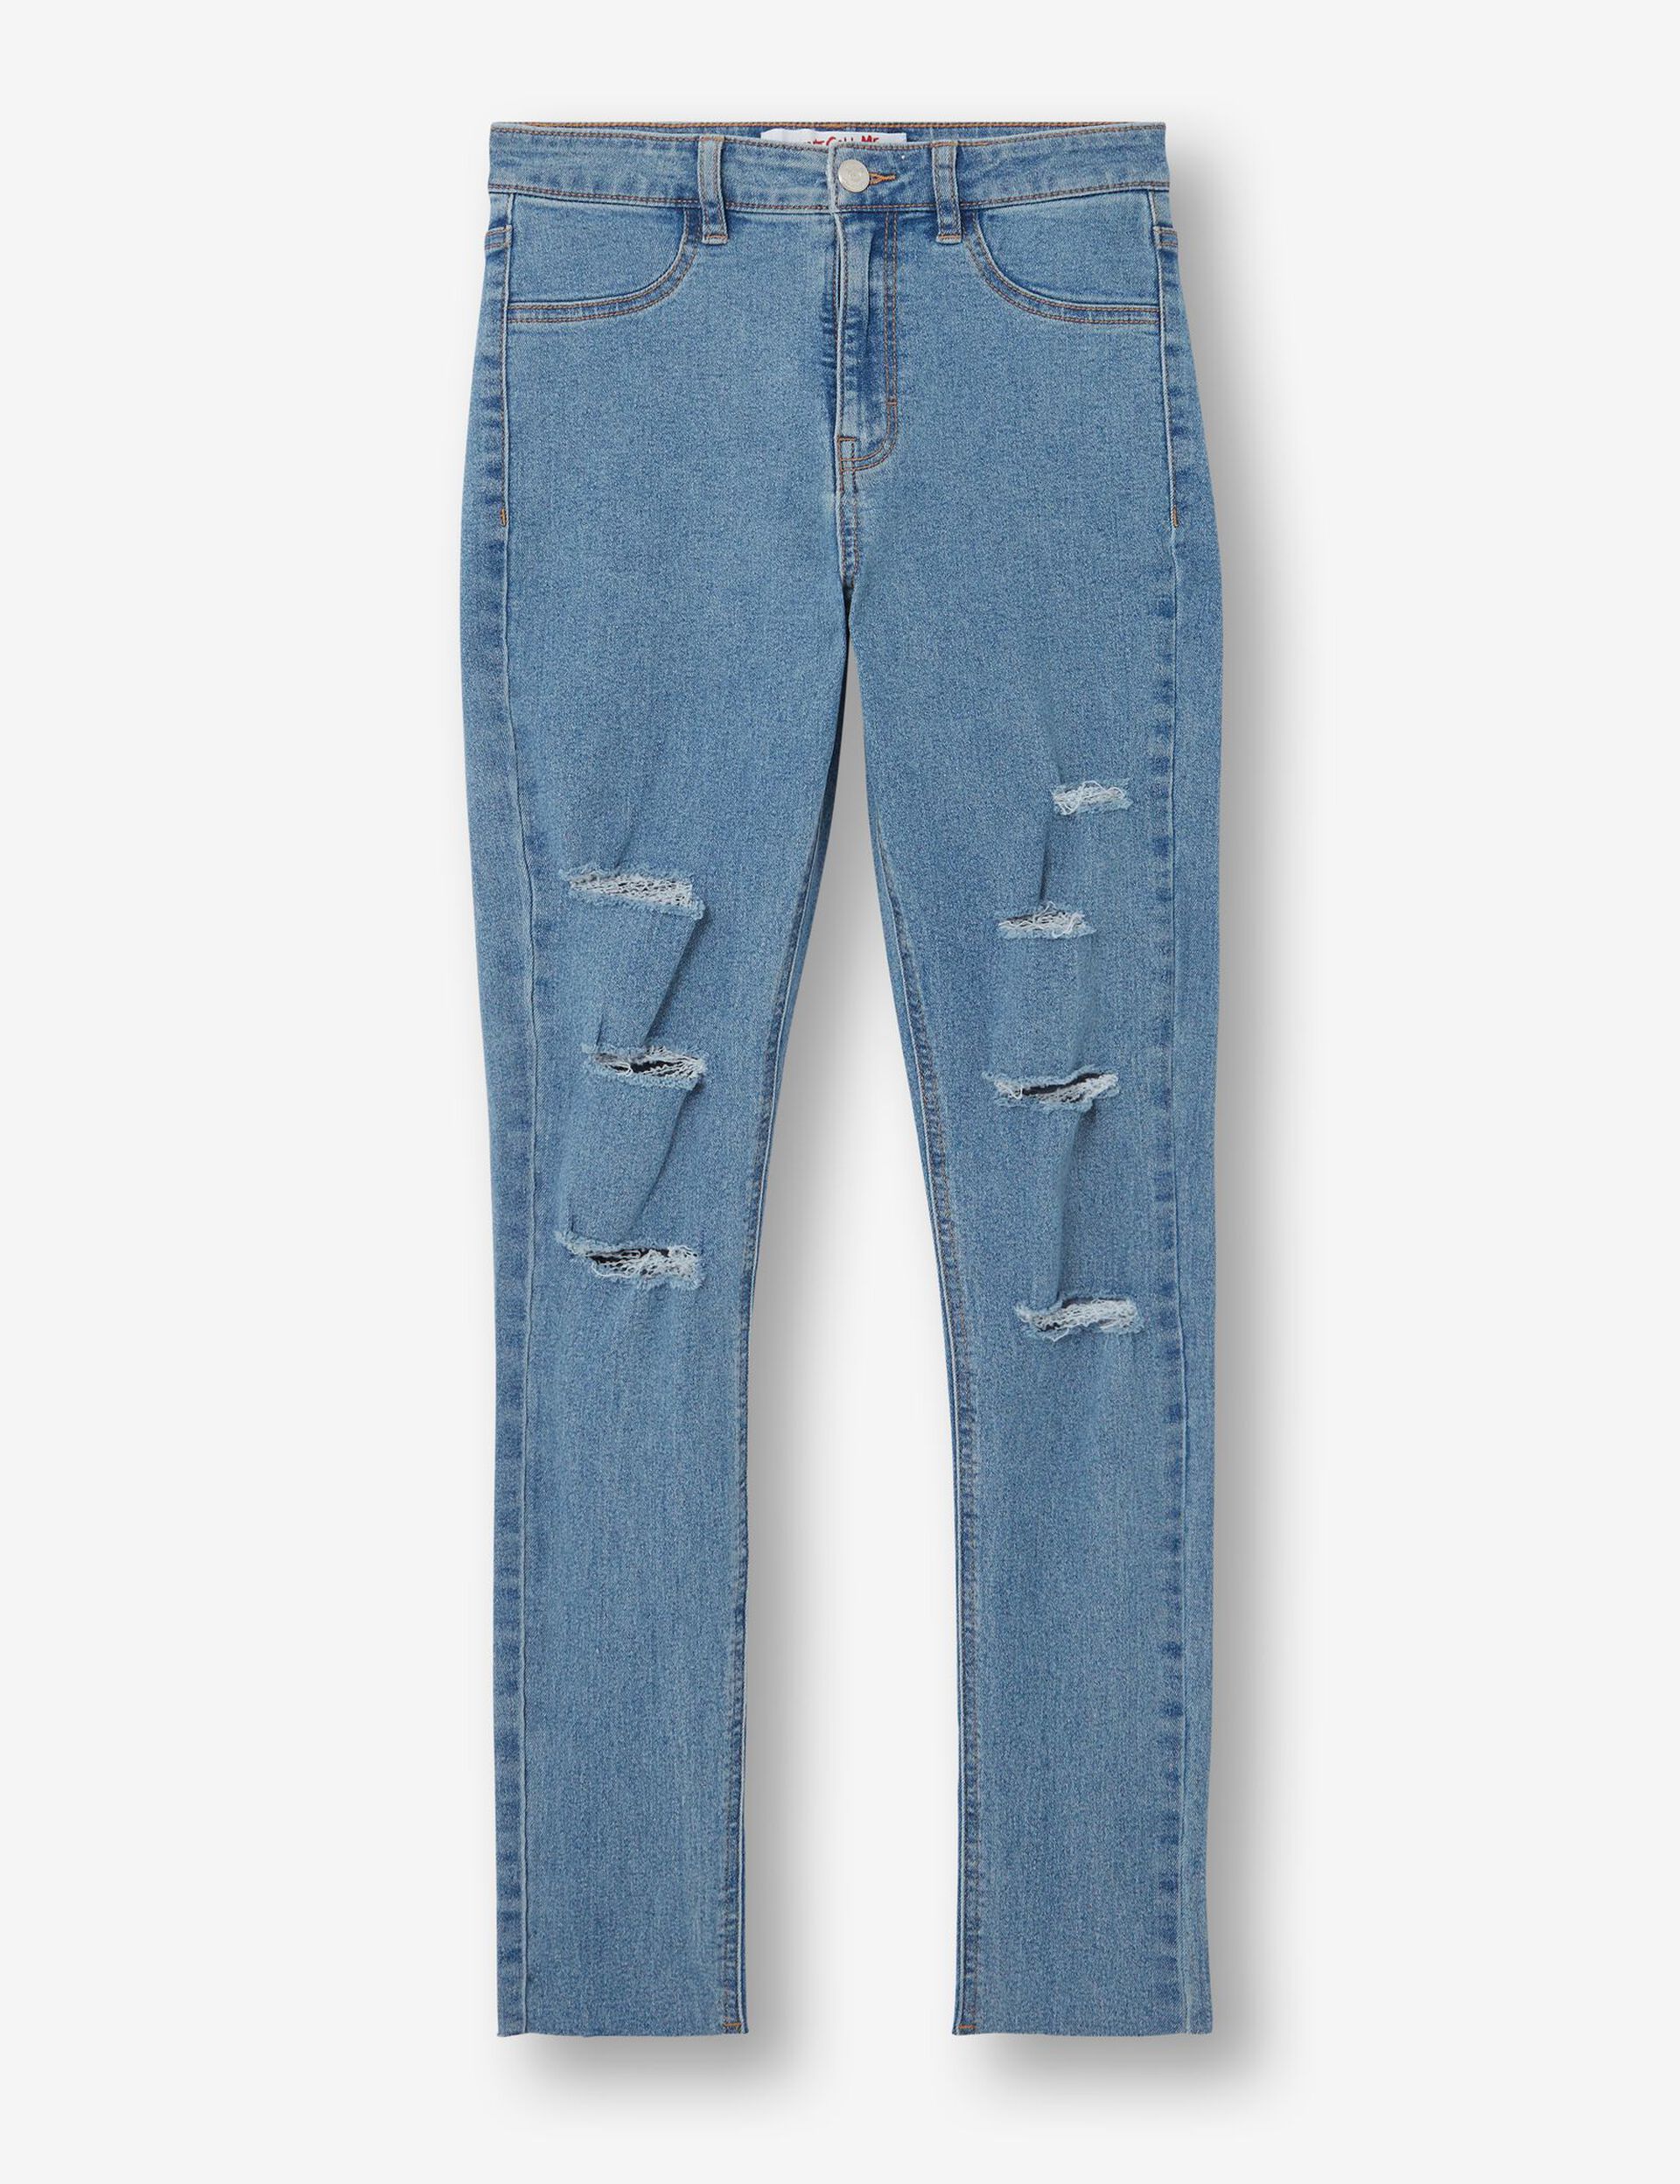 Distressed high-waisted jeggings